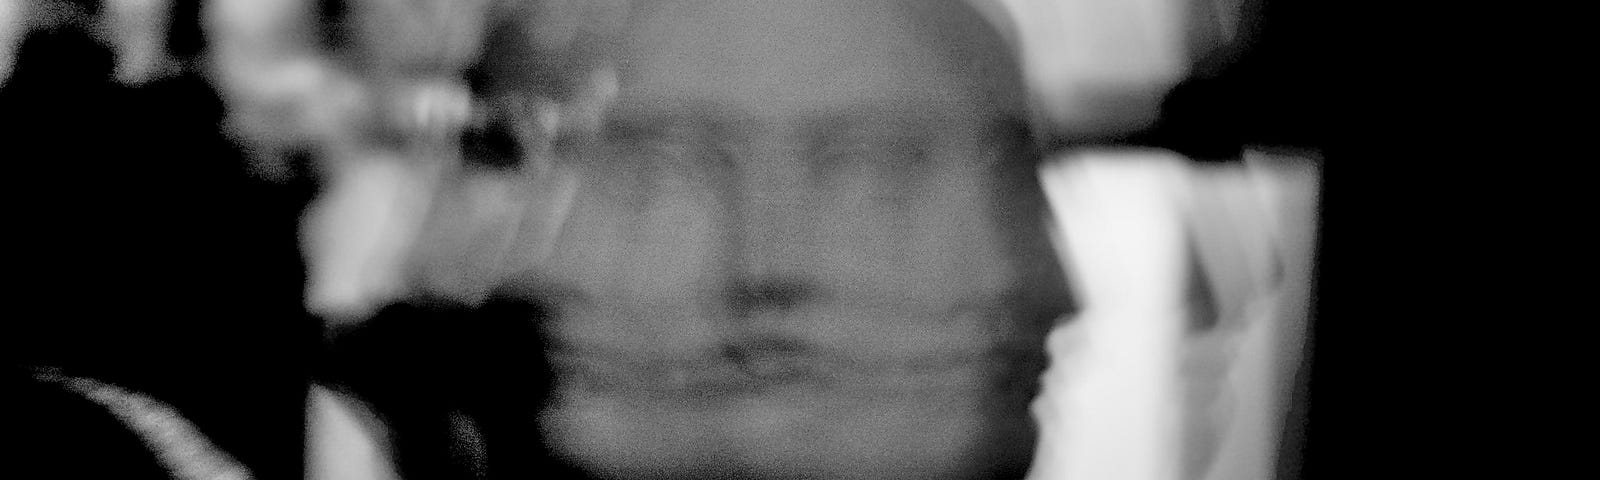 Black and white superimposed image of a sculpture of a face.